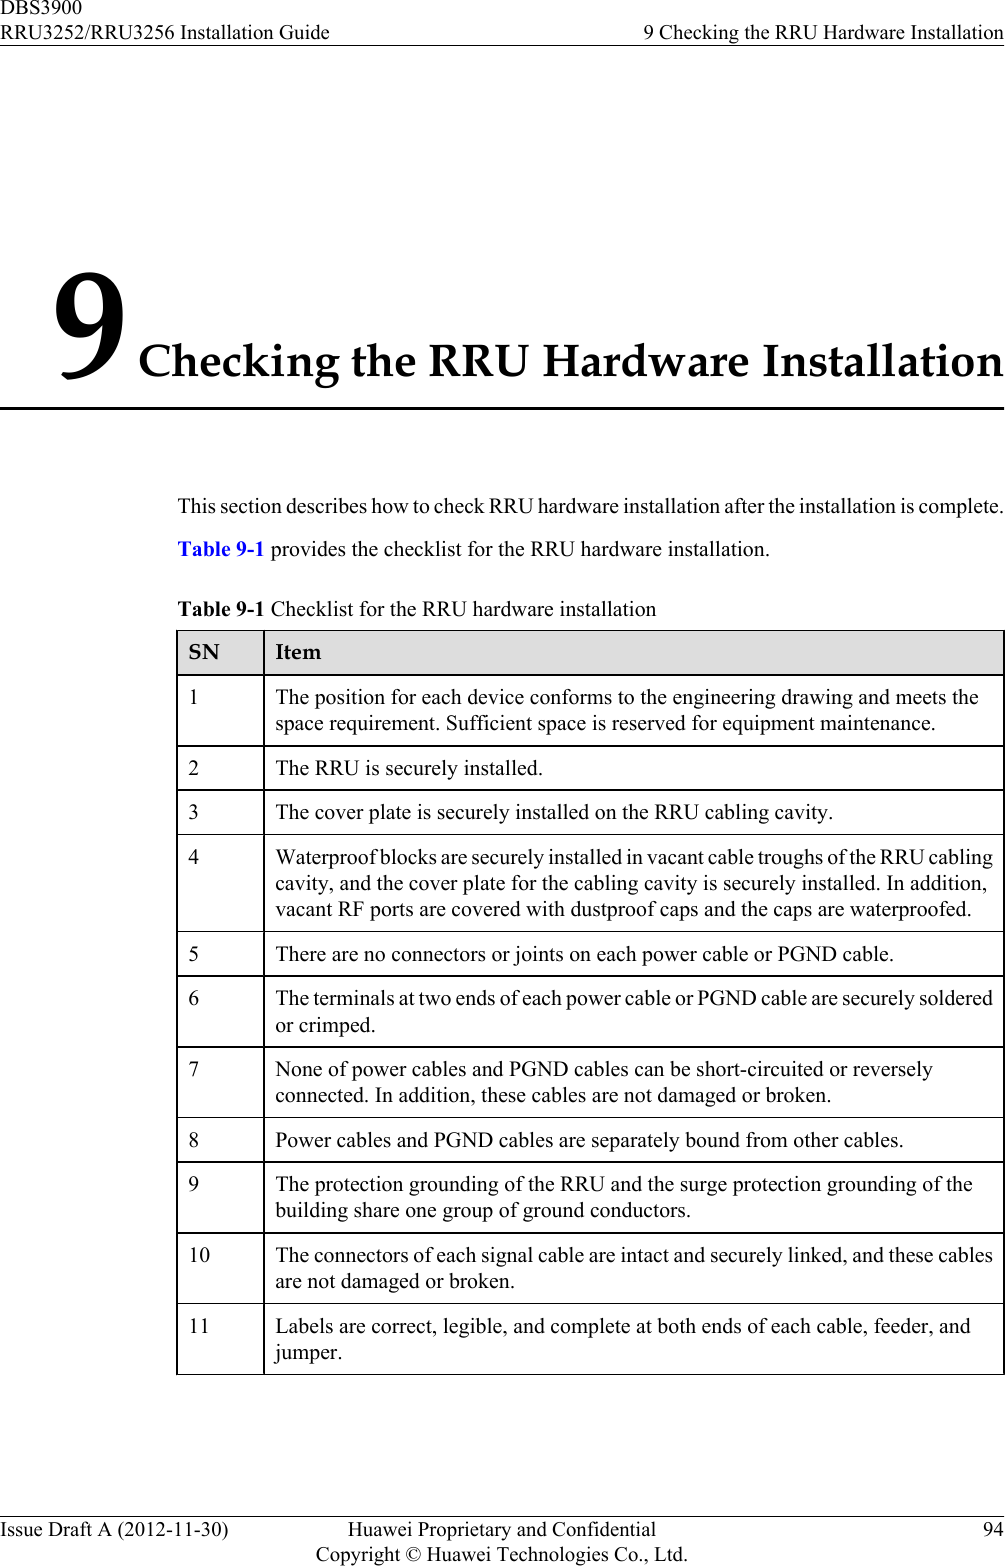 9 Checking the RRU Hardware InstallationThis section describes how to check RRU hardware installation after the installation is complete.Table 9-1 provides the checklist for the RRU hardware installation.Table 9-1 Checklist for the RRU hardware installationSN Item1The position for each device conforms to the engineering drawing and meets thespace requirement. Sufficient space is reserved for equipment maintenance.2 The RRU is securely installed.3 The cover plate is securely installed on the RRU cabling cavity.4 Waterproof blocks are securely installed in vacant cable troughs of the RRU cablingcavity, and the cover plate for the cabling cavity is securely installed. In addition,vacant RF ports are covered with dustproof caps and the caps are waterproofed.5 There are no connectors or joints on each power cable or PGND cable.6 The terminals at two ends of each power cable or PGND cable are securely solderedor crimped.7 None of power cables and PGND cables can be short-circuited or reverselyconnected. In addition, these cables are not damaged or broken.8 Power cables and PGND cables are separately bound from other cables.9 The protection grounding of the RRU and the surge protection grounding of thebuilding share one group of ground conductors.10 The connectors of each signal cable are intact and securely linked, and these cablesare not damaged or broken.11 Labels are correct, legible, and complete at both ends of each cable, feeder, andjumper.DBS3900RRU3252/RRU3256 Installation Guide 9 Checking the RRU Hardware InstallationIssue Draft A (2012-11-30) Huawei Proprietary and ConfidentialCopyright © Huawei Technologies Co., Ltd.94